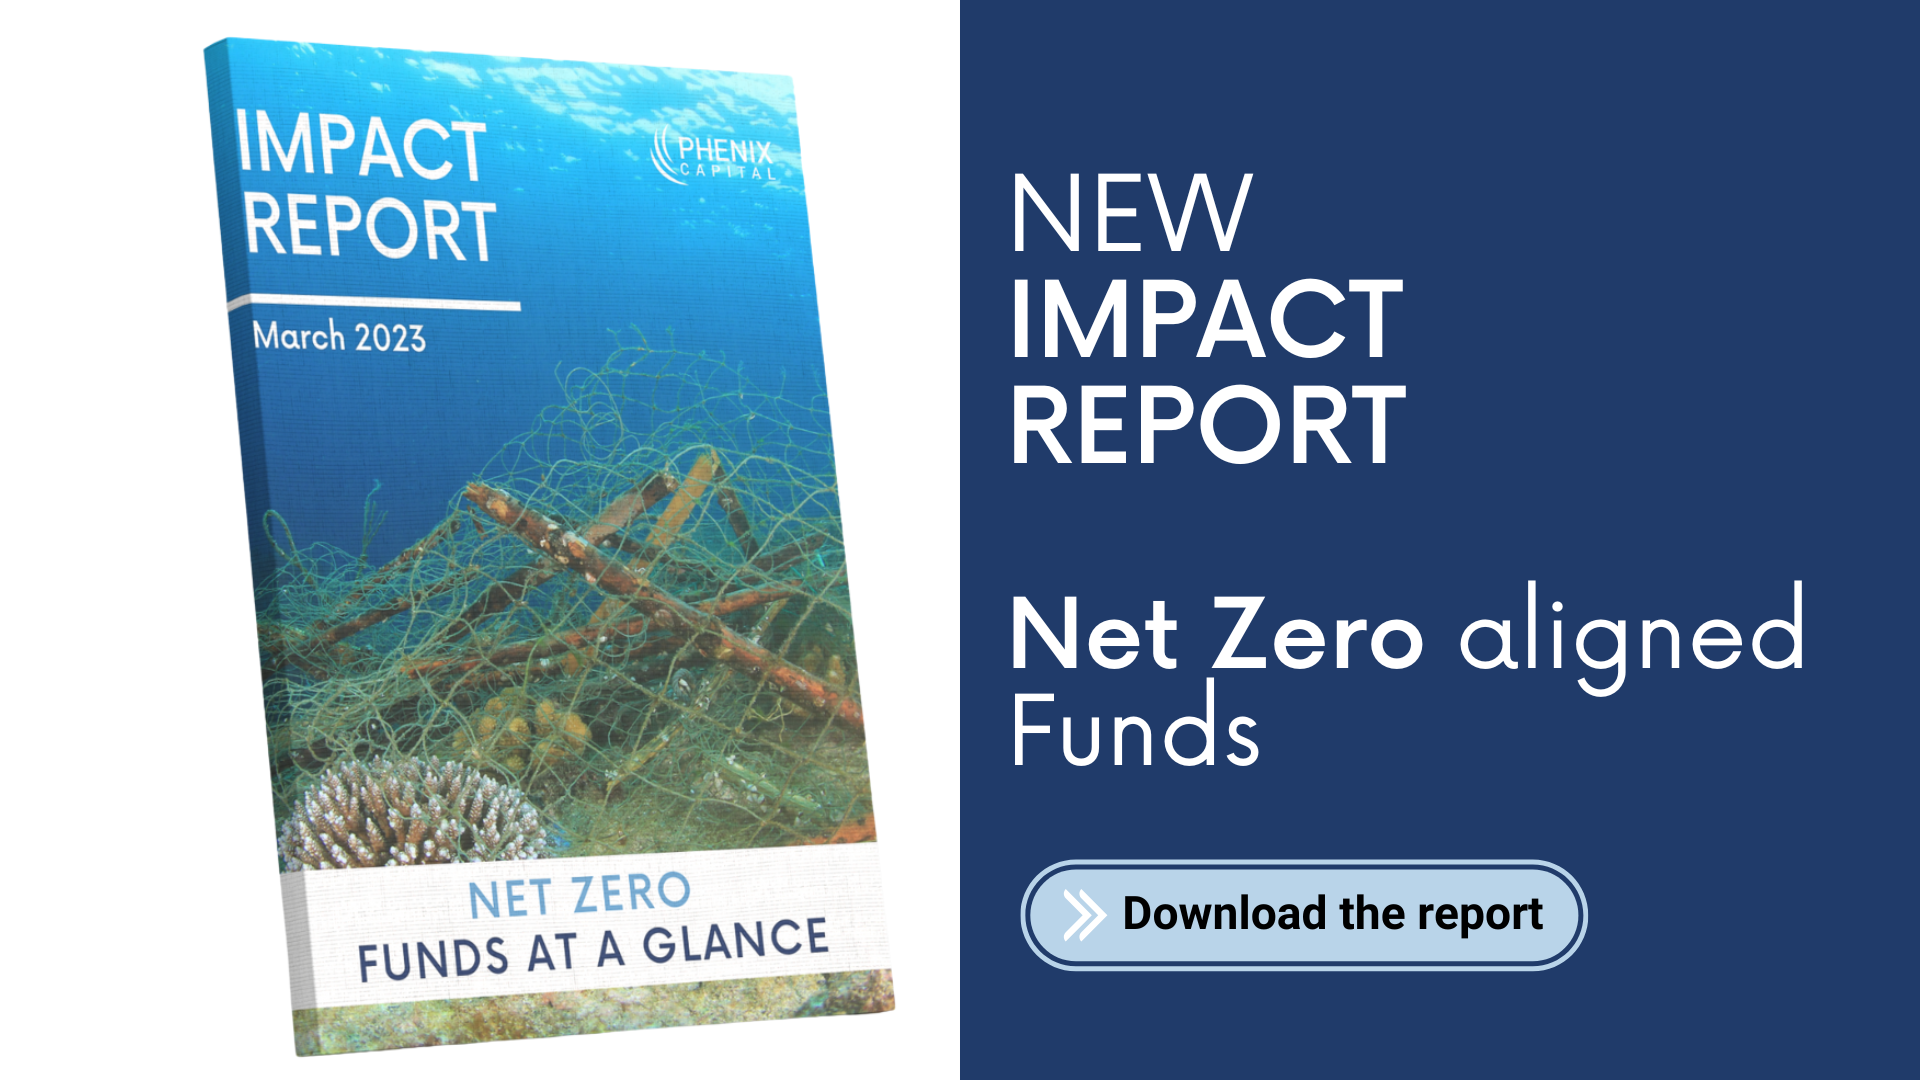 PRESS RELEASE: 729 Net-Zero-aligned funds, of which 58% are open to investment